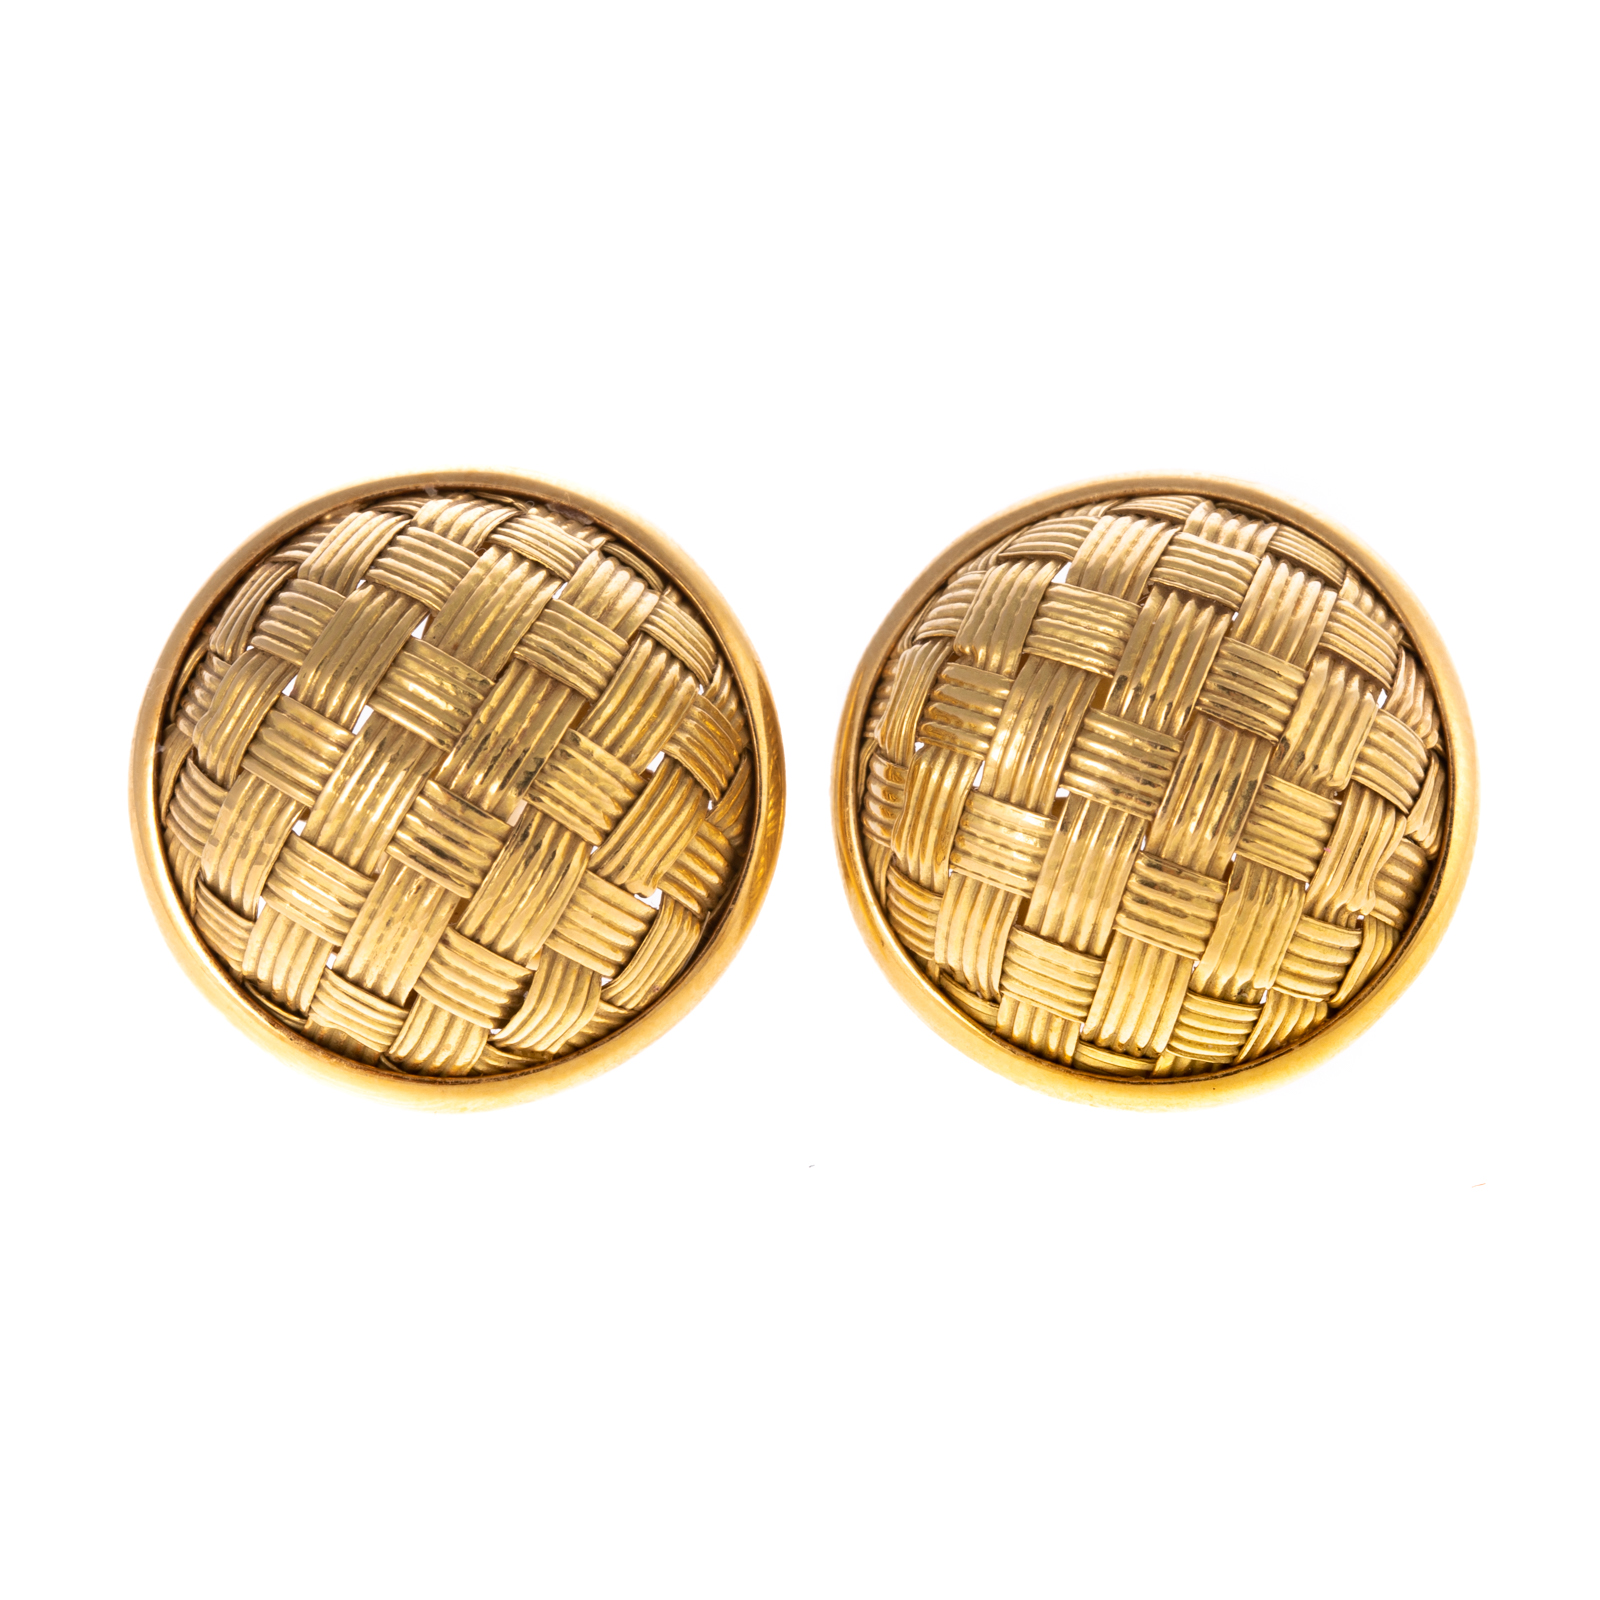 A PAIR OF BASKETWEAVE DOME CLIP